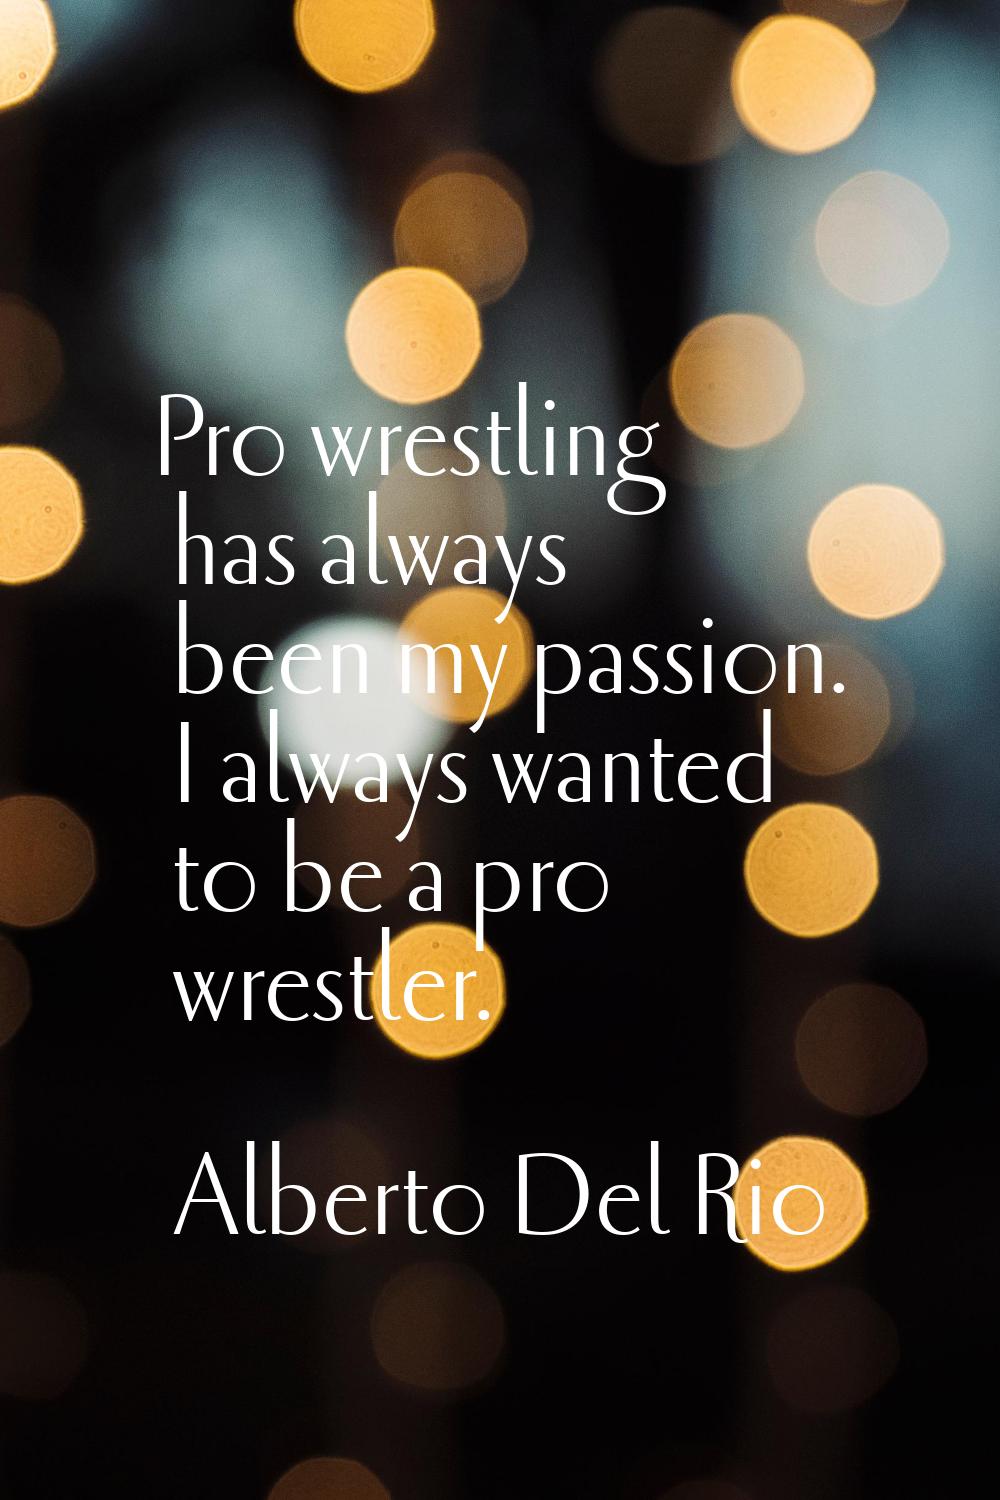 Pro wrestling has always been my passion. I always wanted to be a pro wrestler.